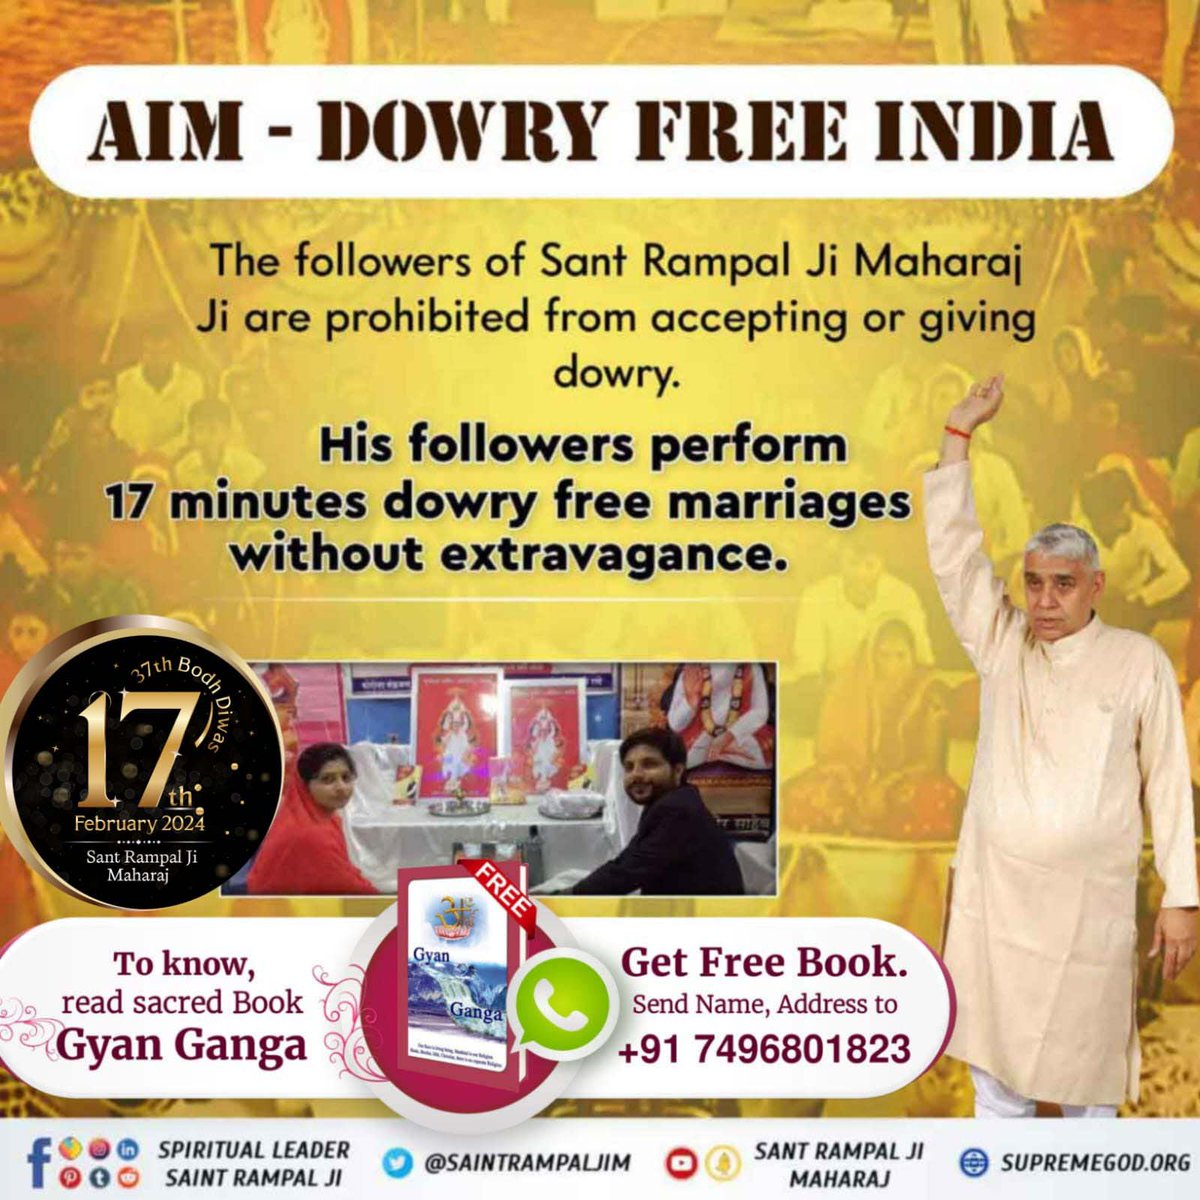 #संत_रामपालजी_के_उद्देश्य Dowry Free India Know more about Holy Scriptures with Proof Visit Satlok Ashram YouTube Channel. 6Days Left For Bodh Diwas